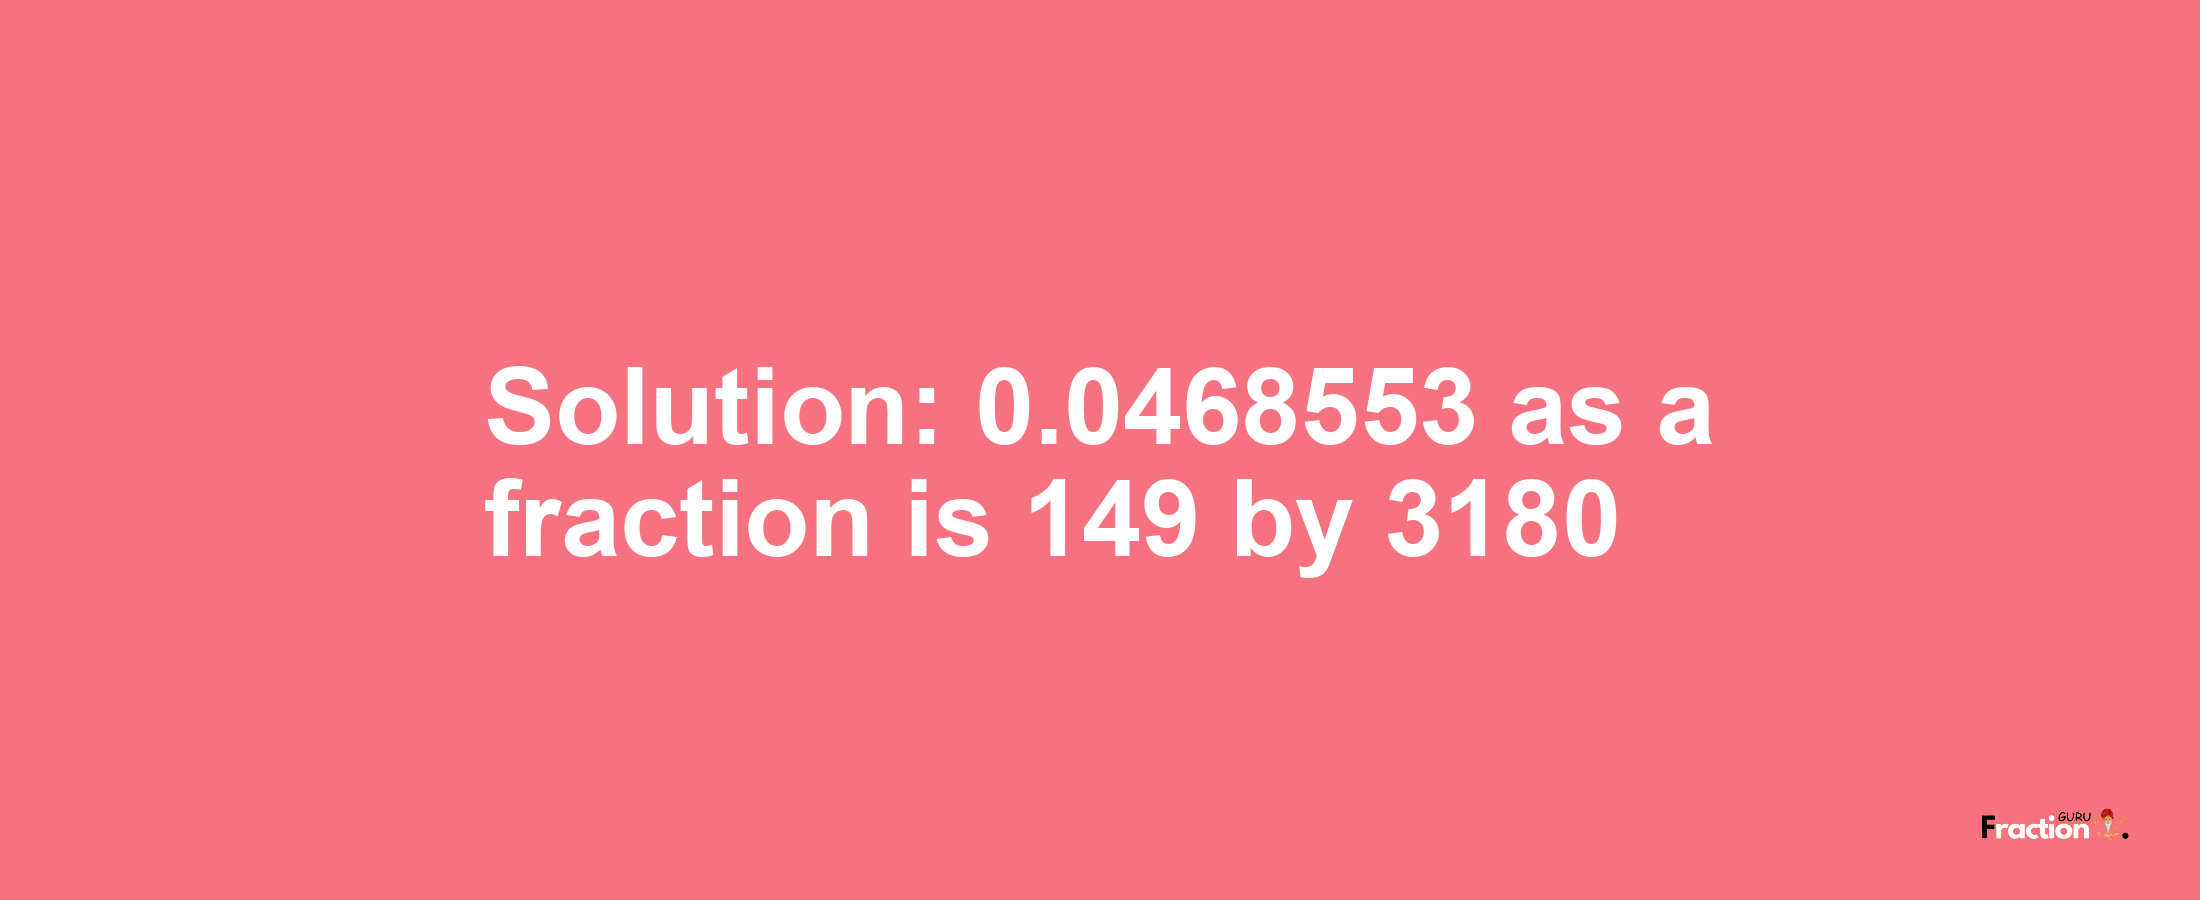 Solution:0.0468553 as a fraction is 149/3180